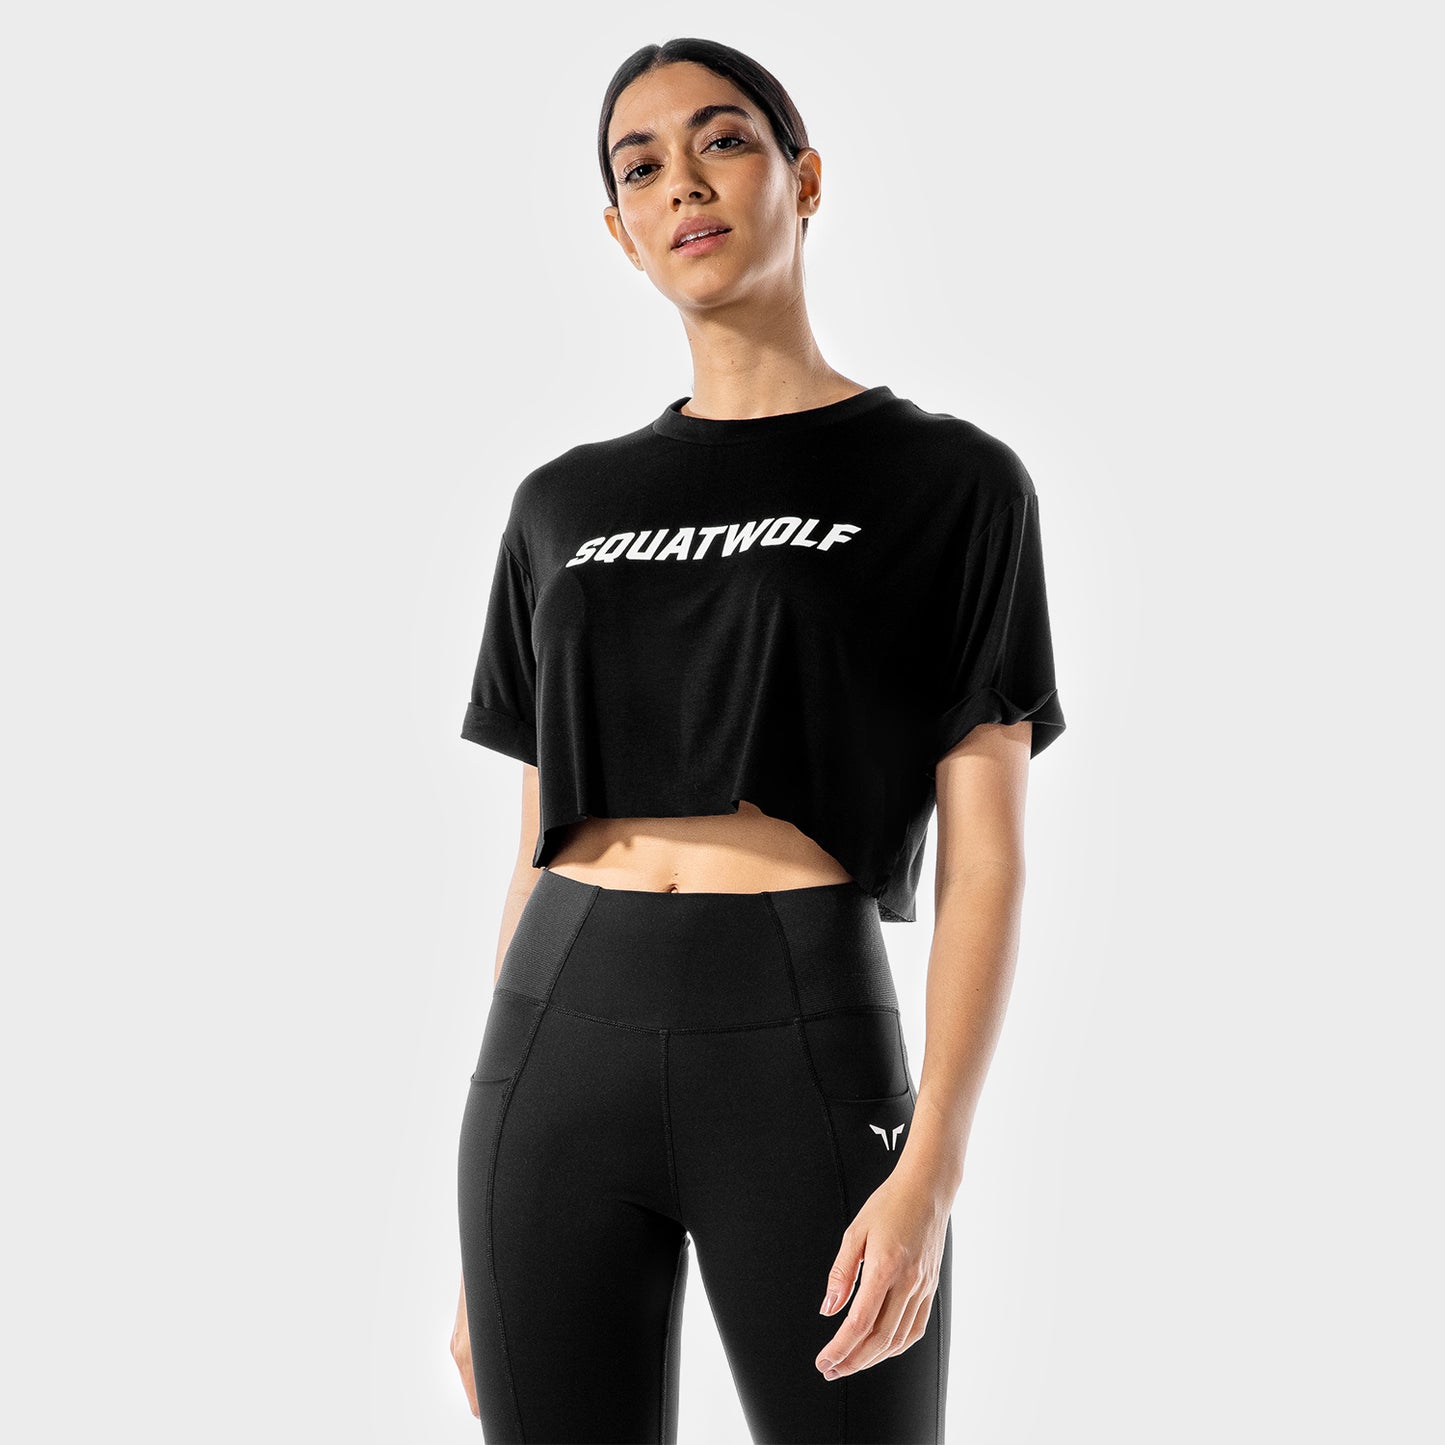 squatwolf-gym-t-shirts-for-women-iconic-crop-tee-black-workout-clothes